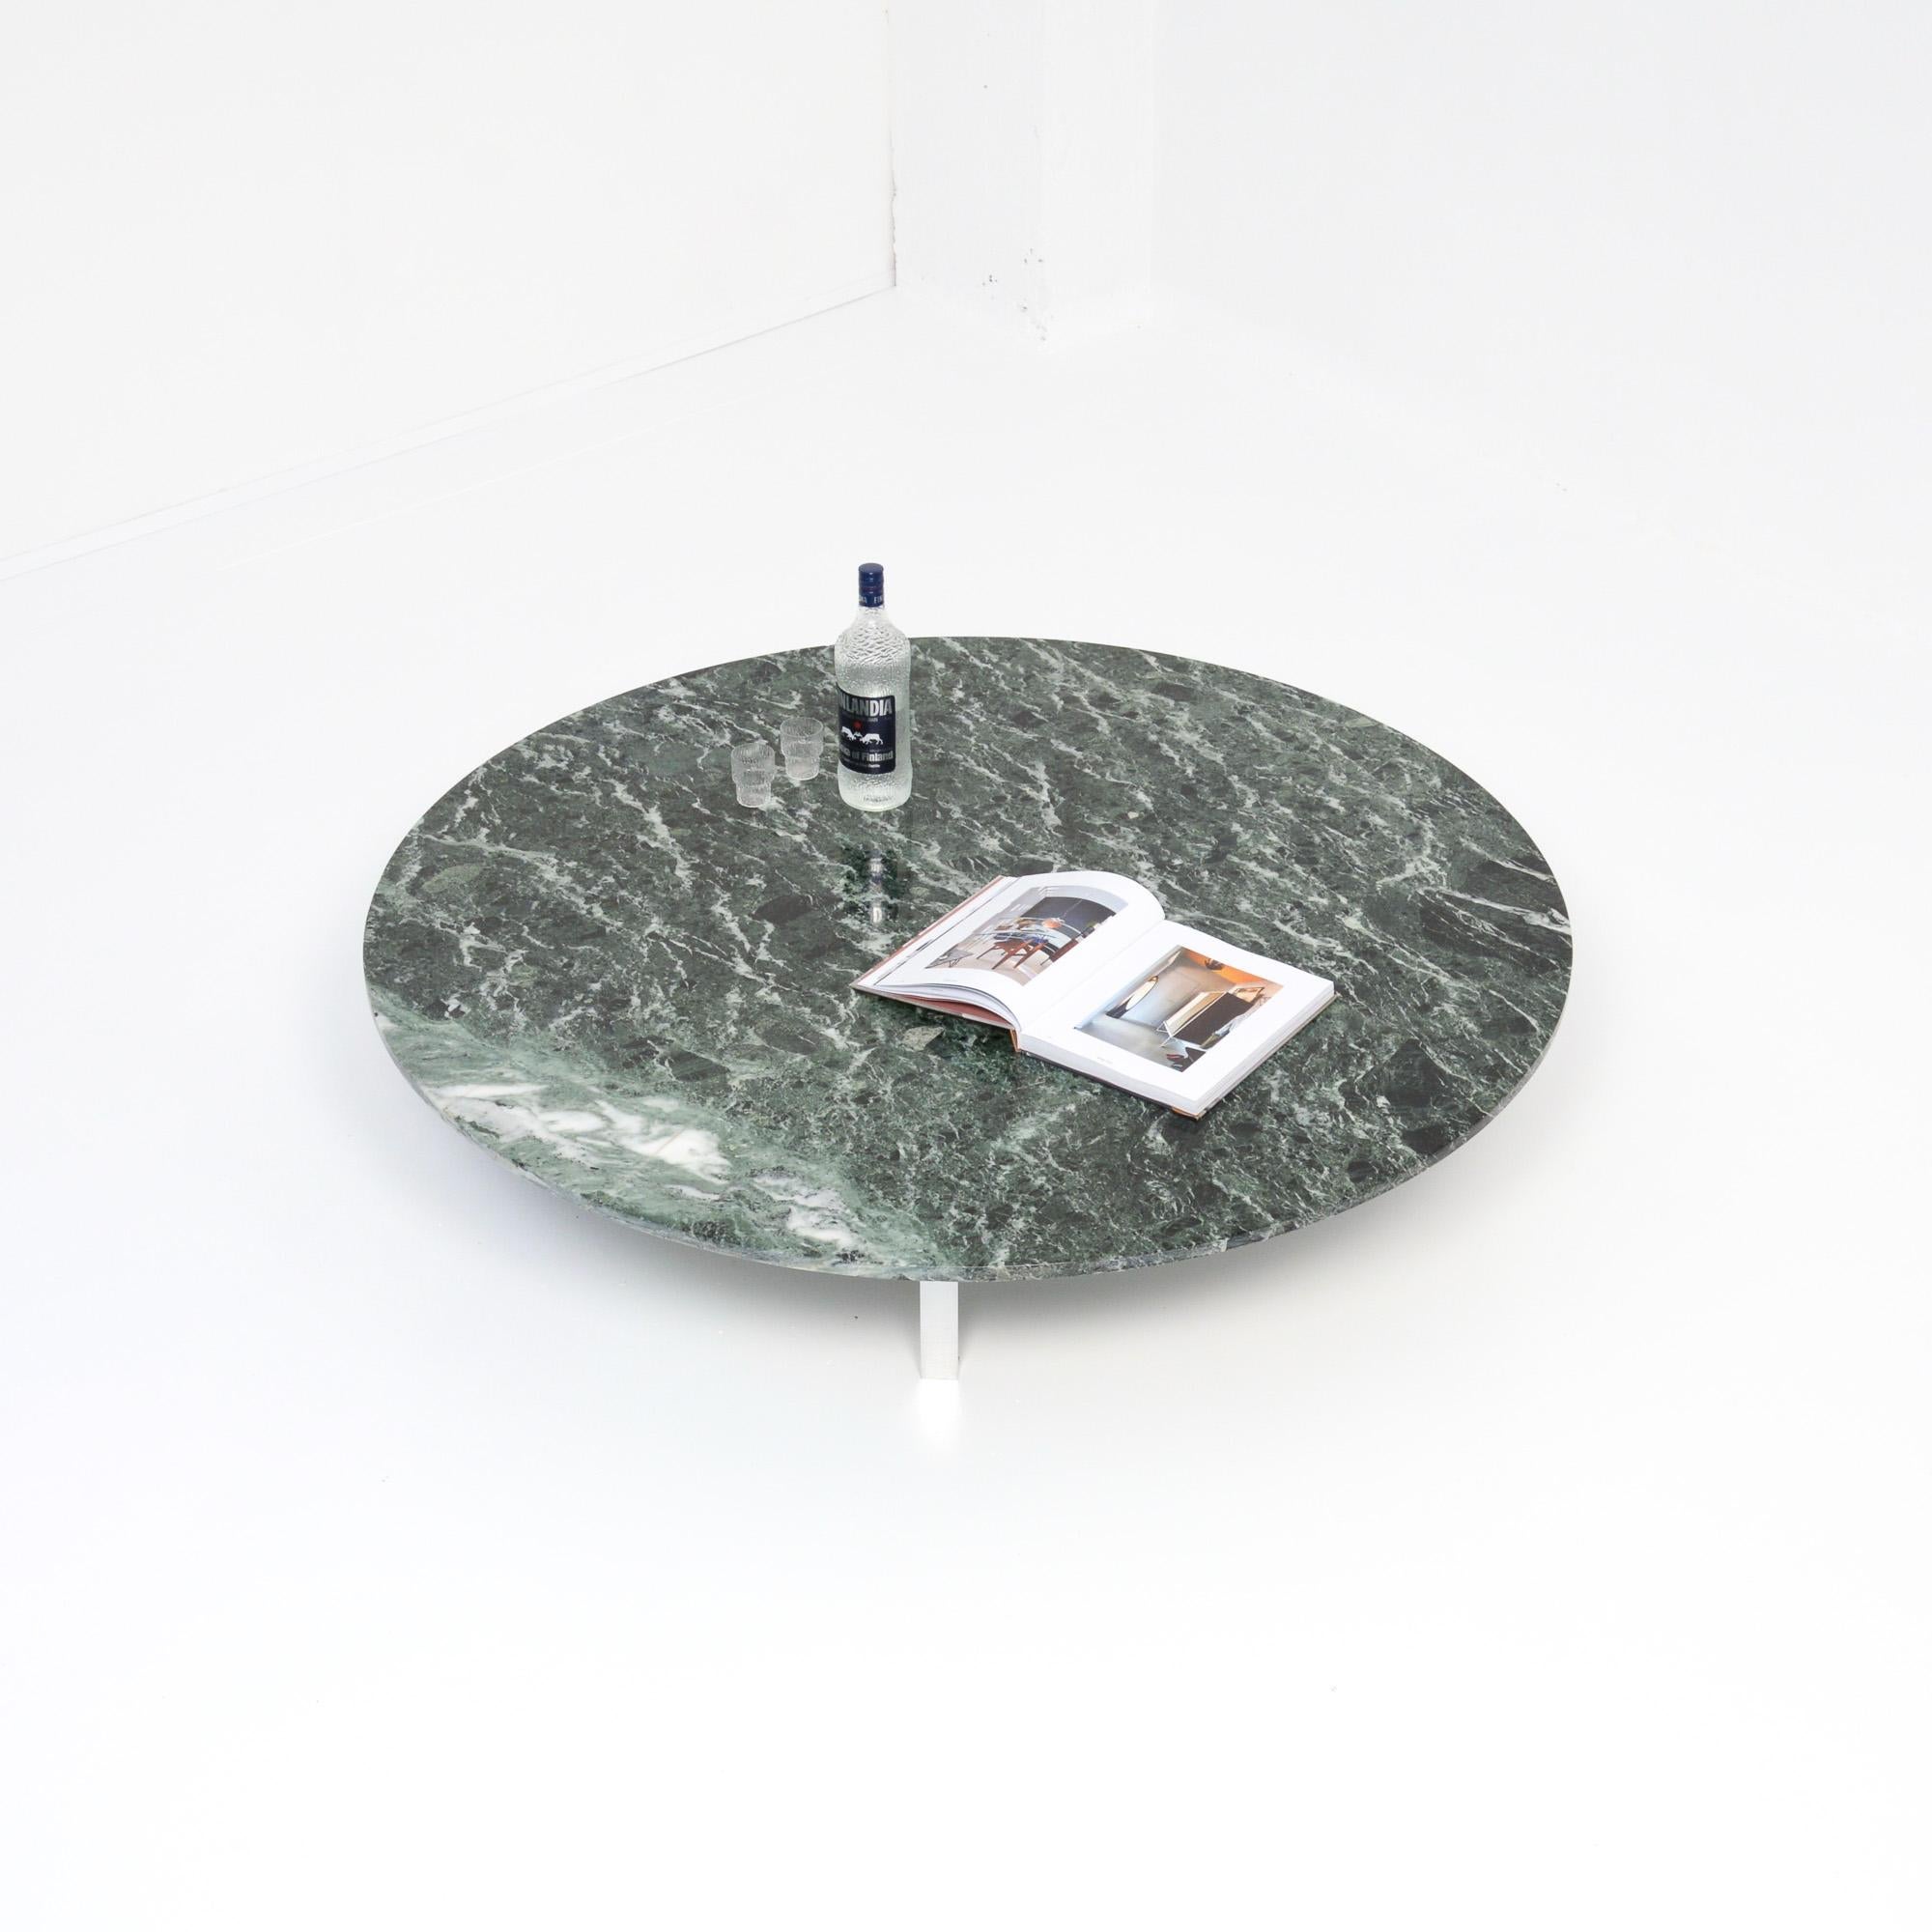 This exclusive round green marble coffee table can be dated in the 1970s.
It was bought in the Netherlands by the previous owners. Unfortunately we don’t know the designer and producer. It seems to be inspired by the work of Poul Kjaerholm and